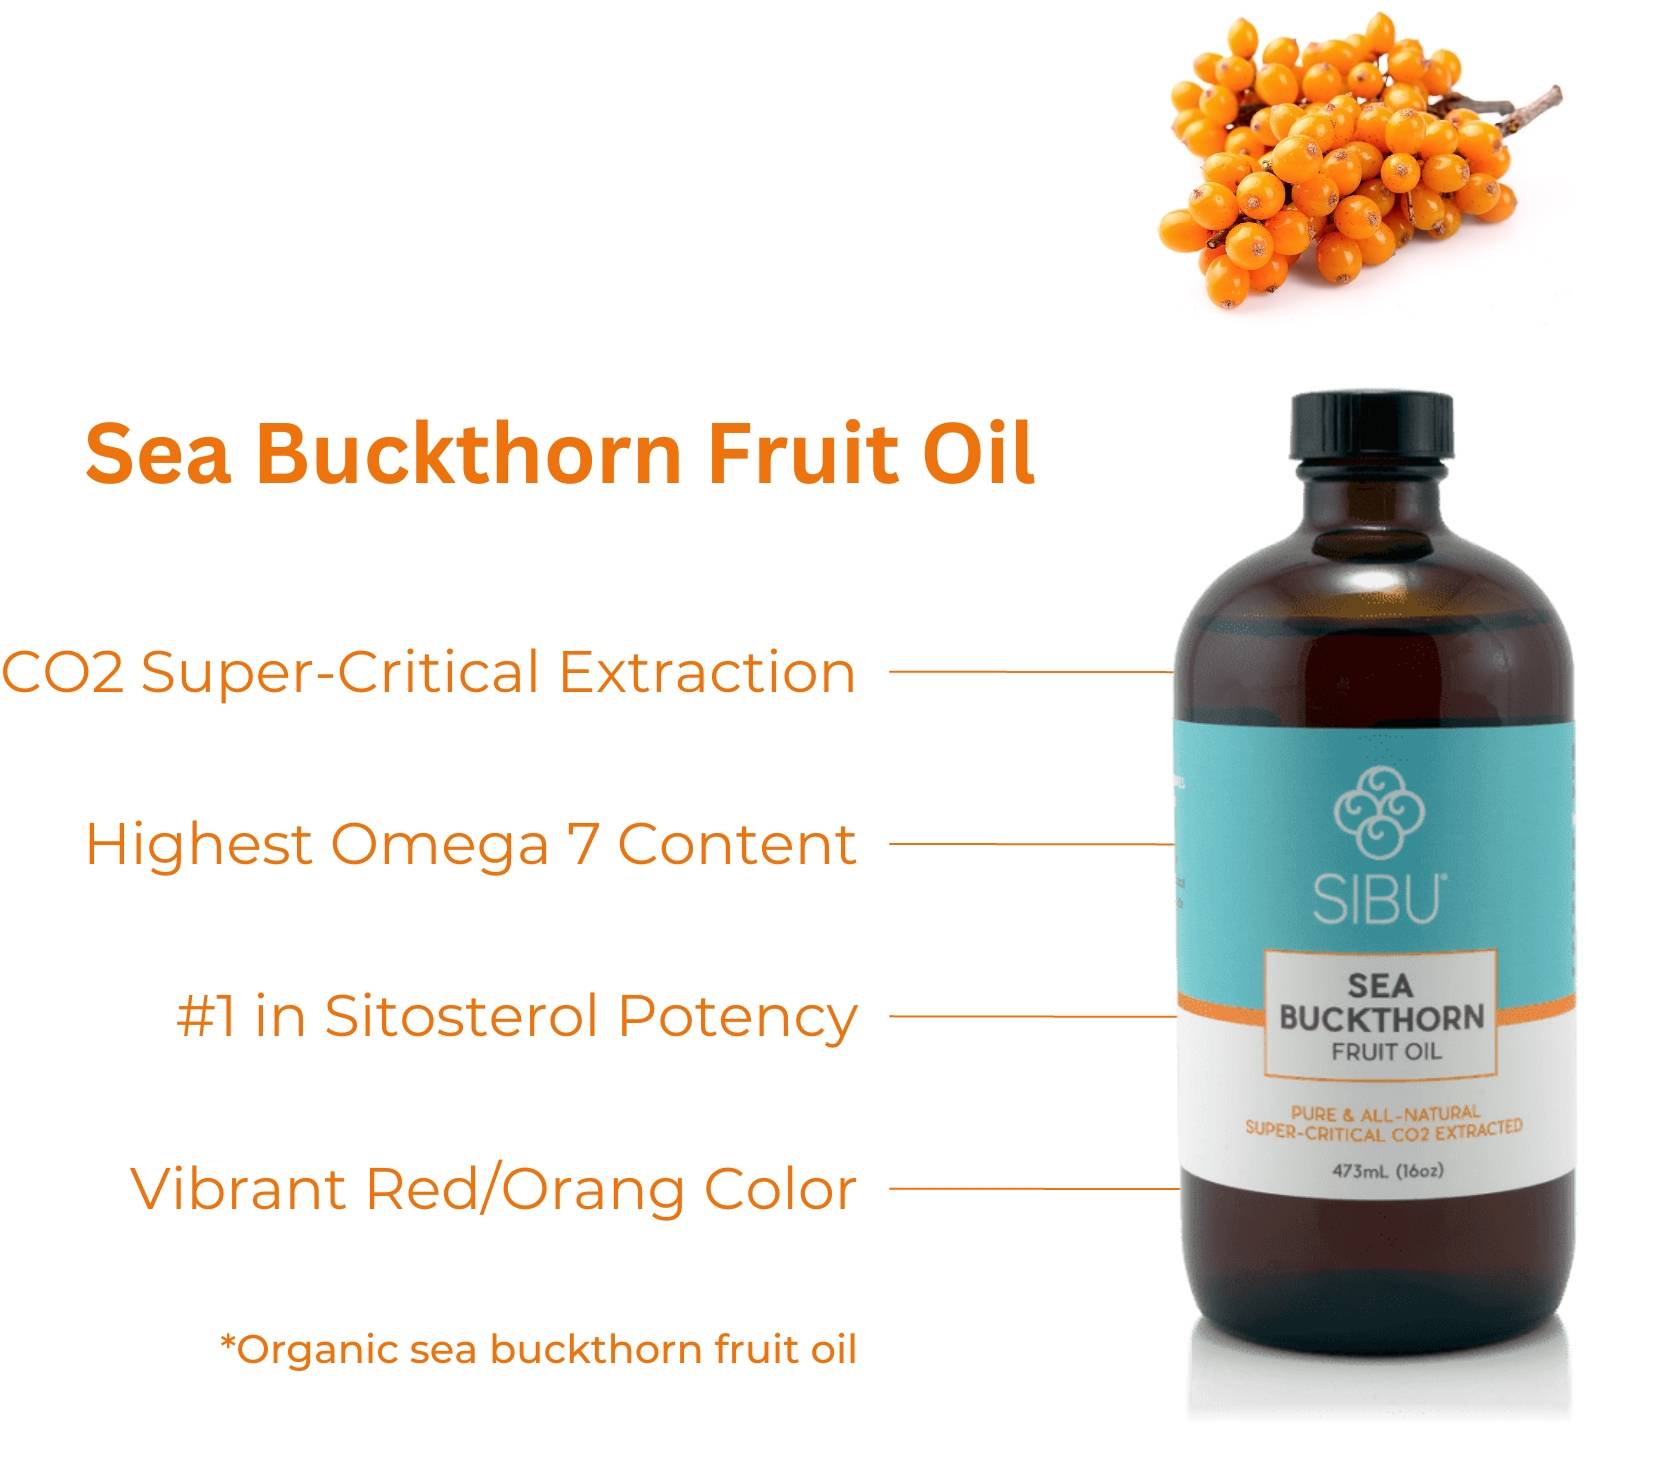 Sea Buckthorn Fruit Oil - Pure & All-Natural, Super-Critical CO2 Extracted